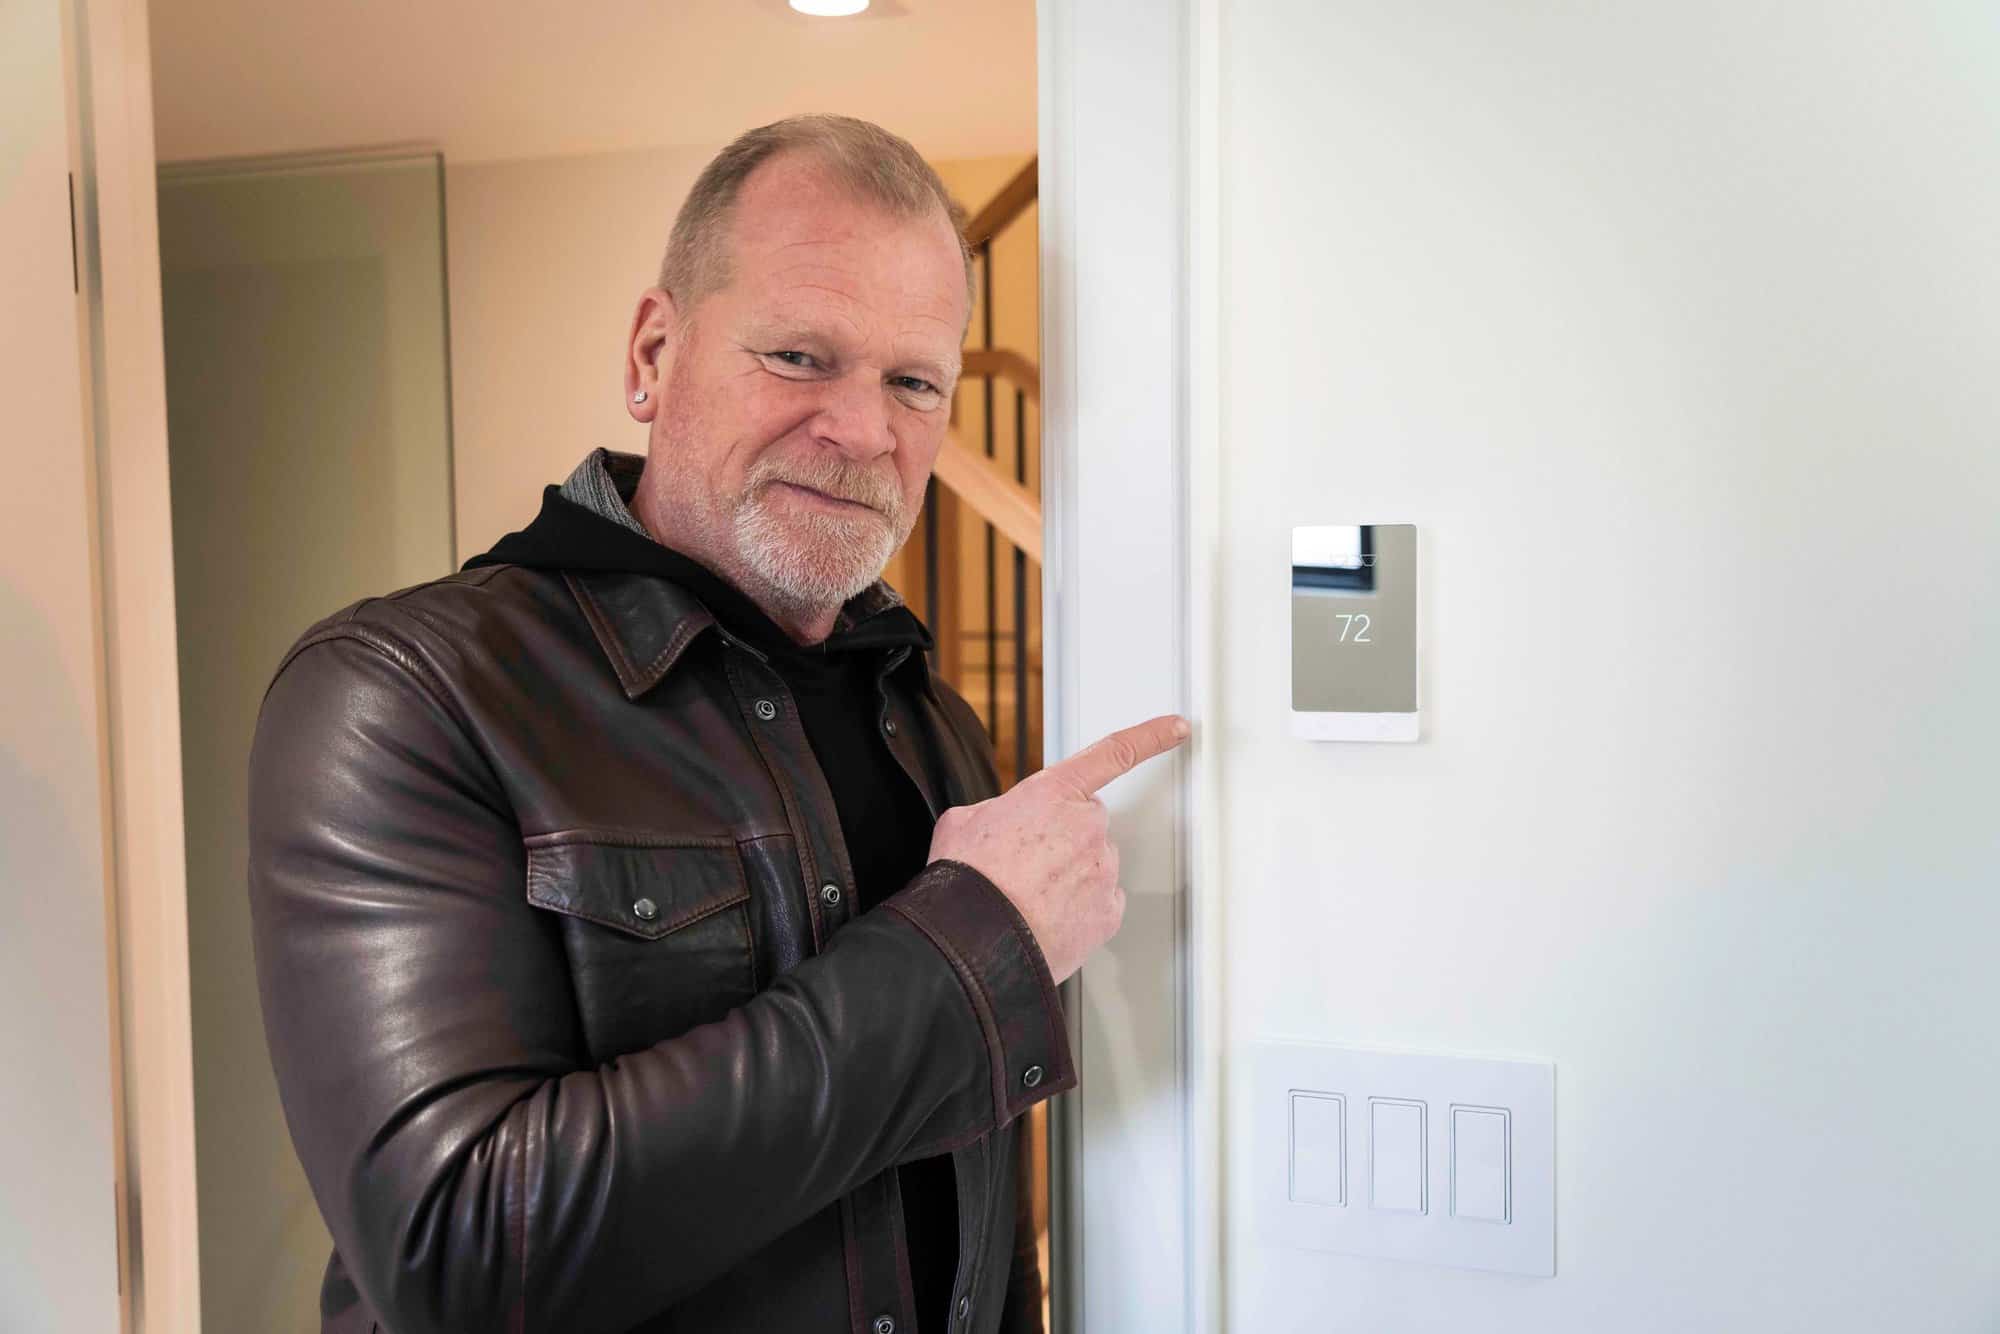 Mike Holmes with Schluter Smart Thermostat Installed On Holmes Project